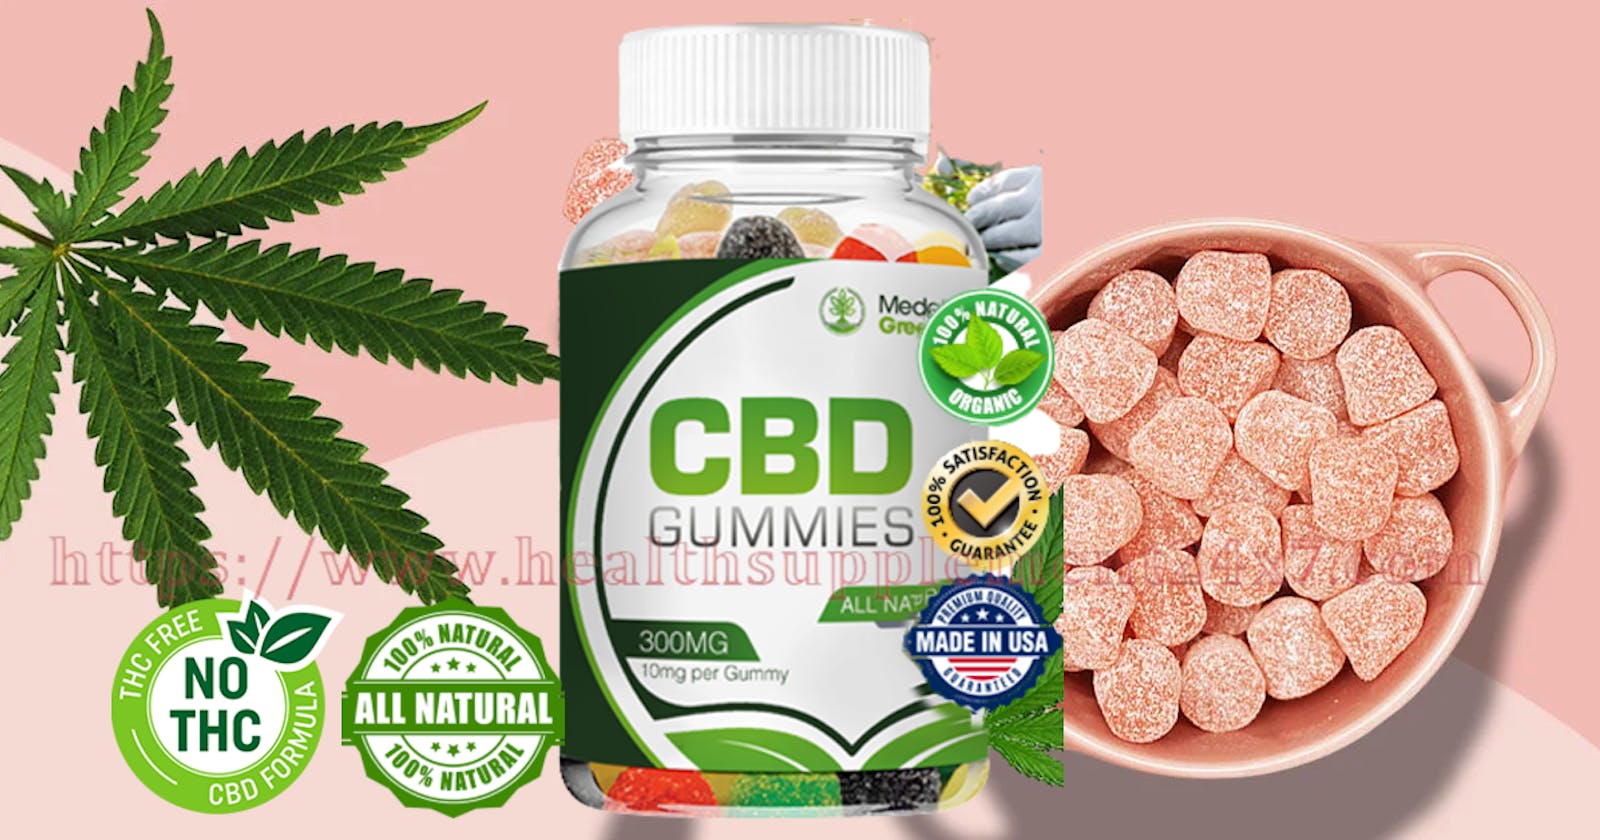 Medallion Greens CBD Gummies {100% Nartural} Drug Free And Non Habitual Formula To Reduce Everyday Stress(Work Or Hoax)